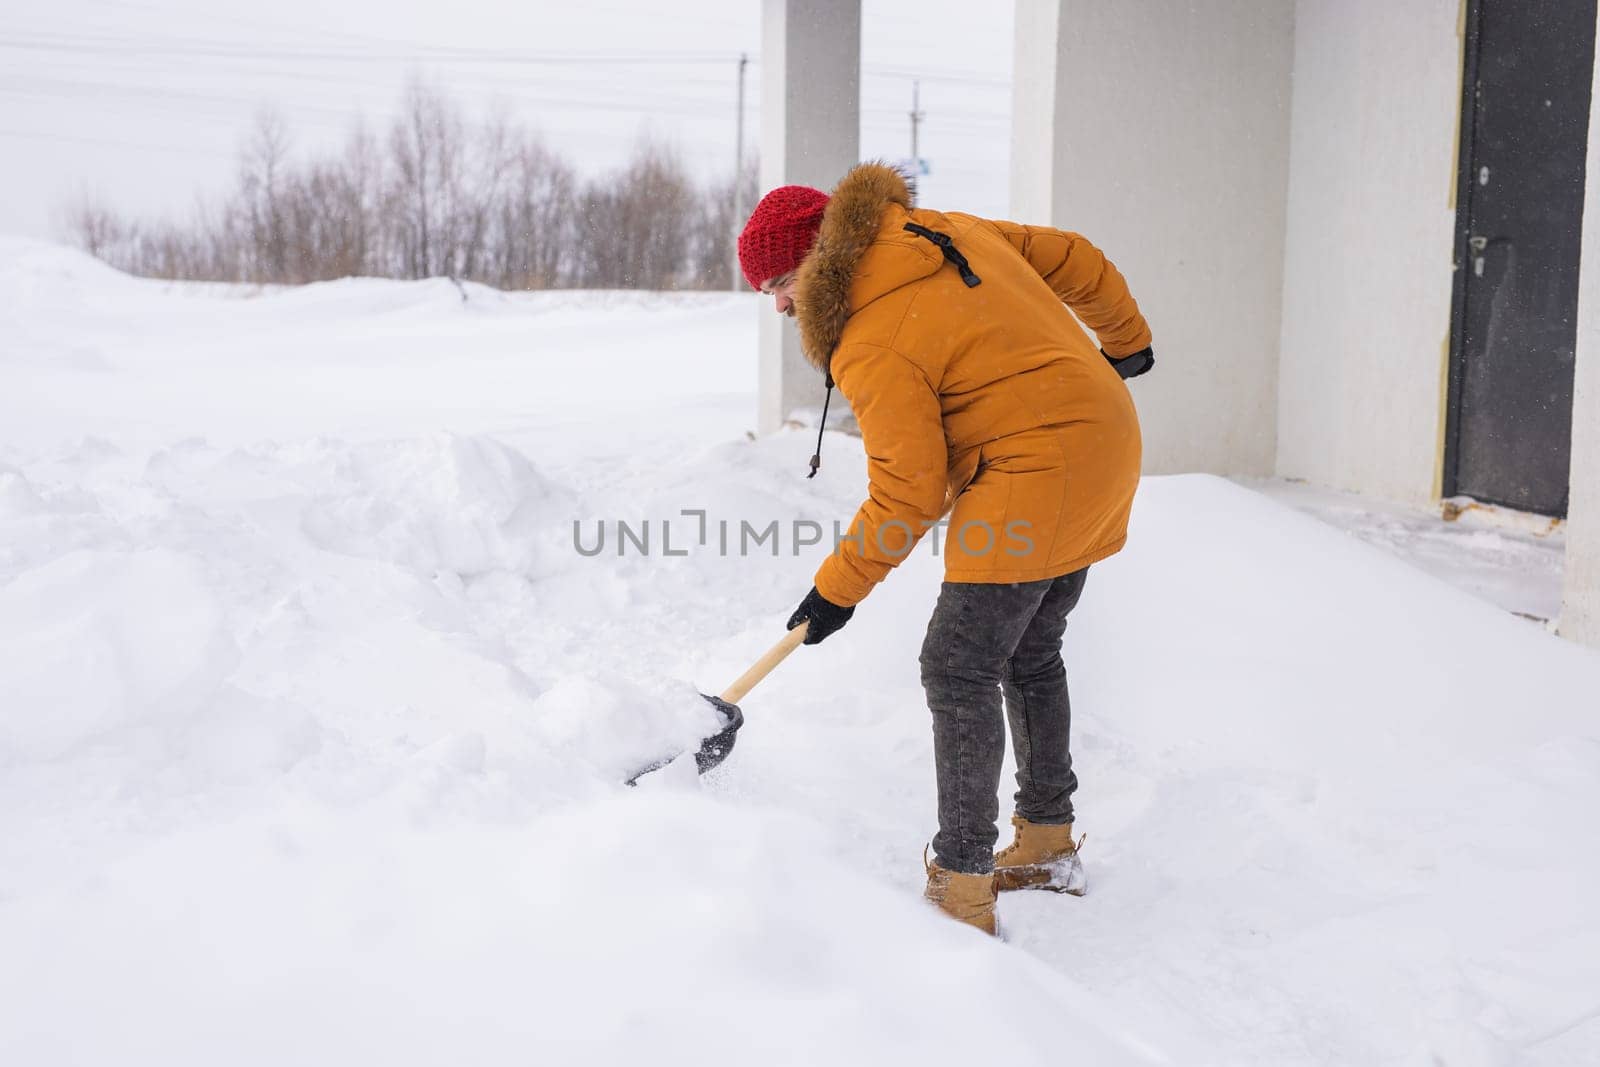 Man removing snow and ice from the sidewalk in front of house. Winter season.